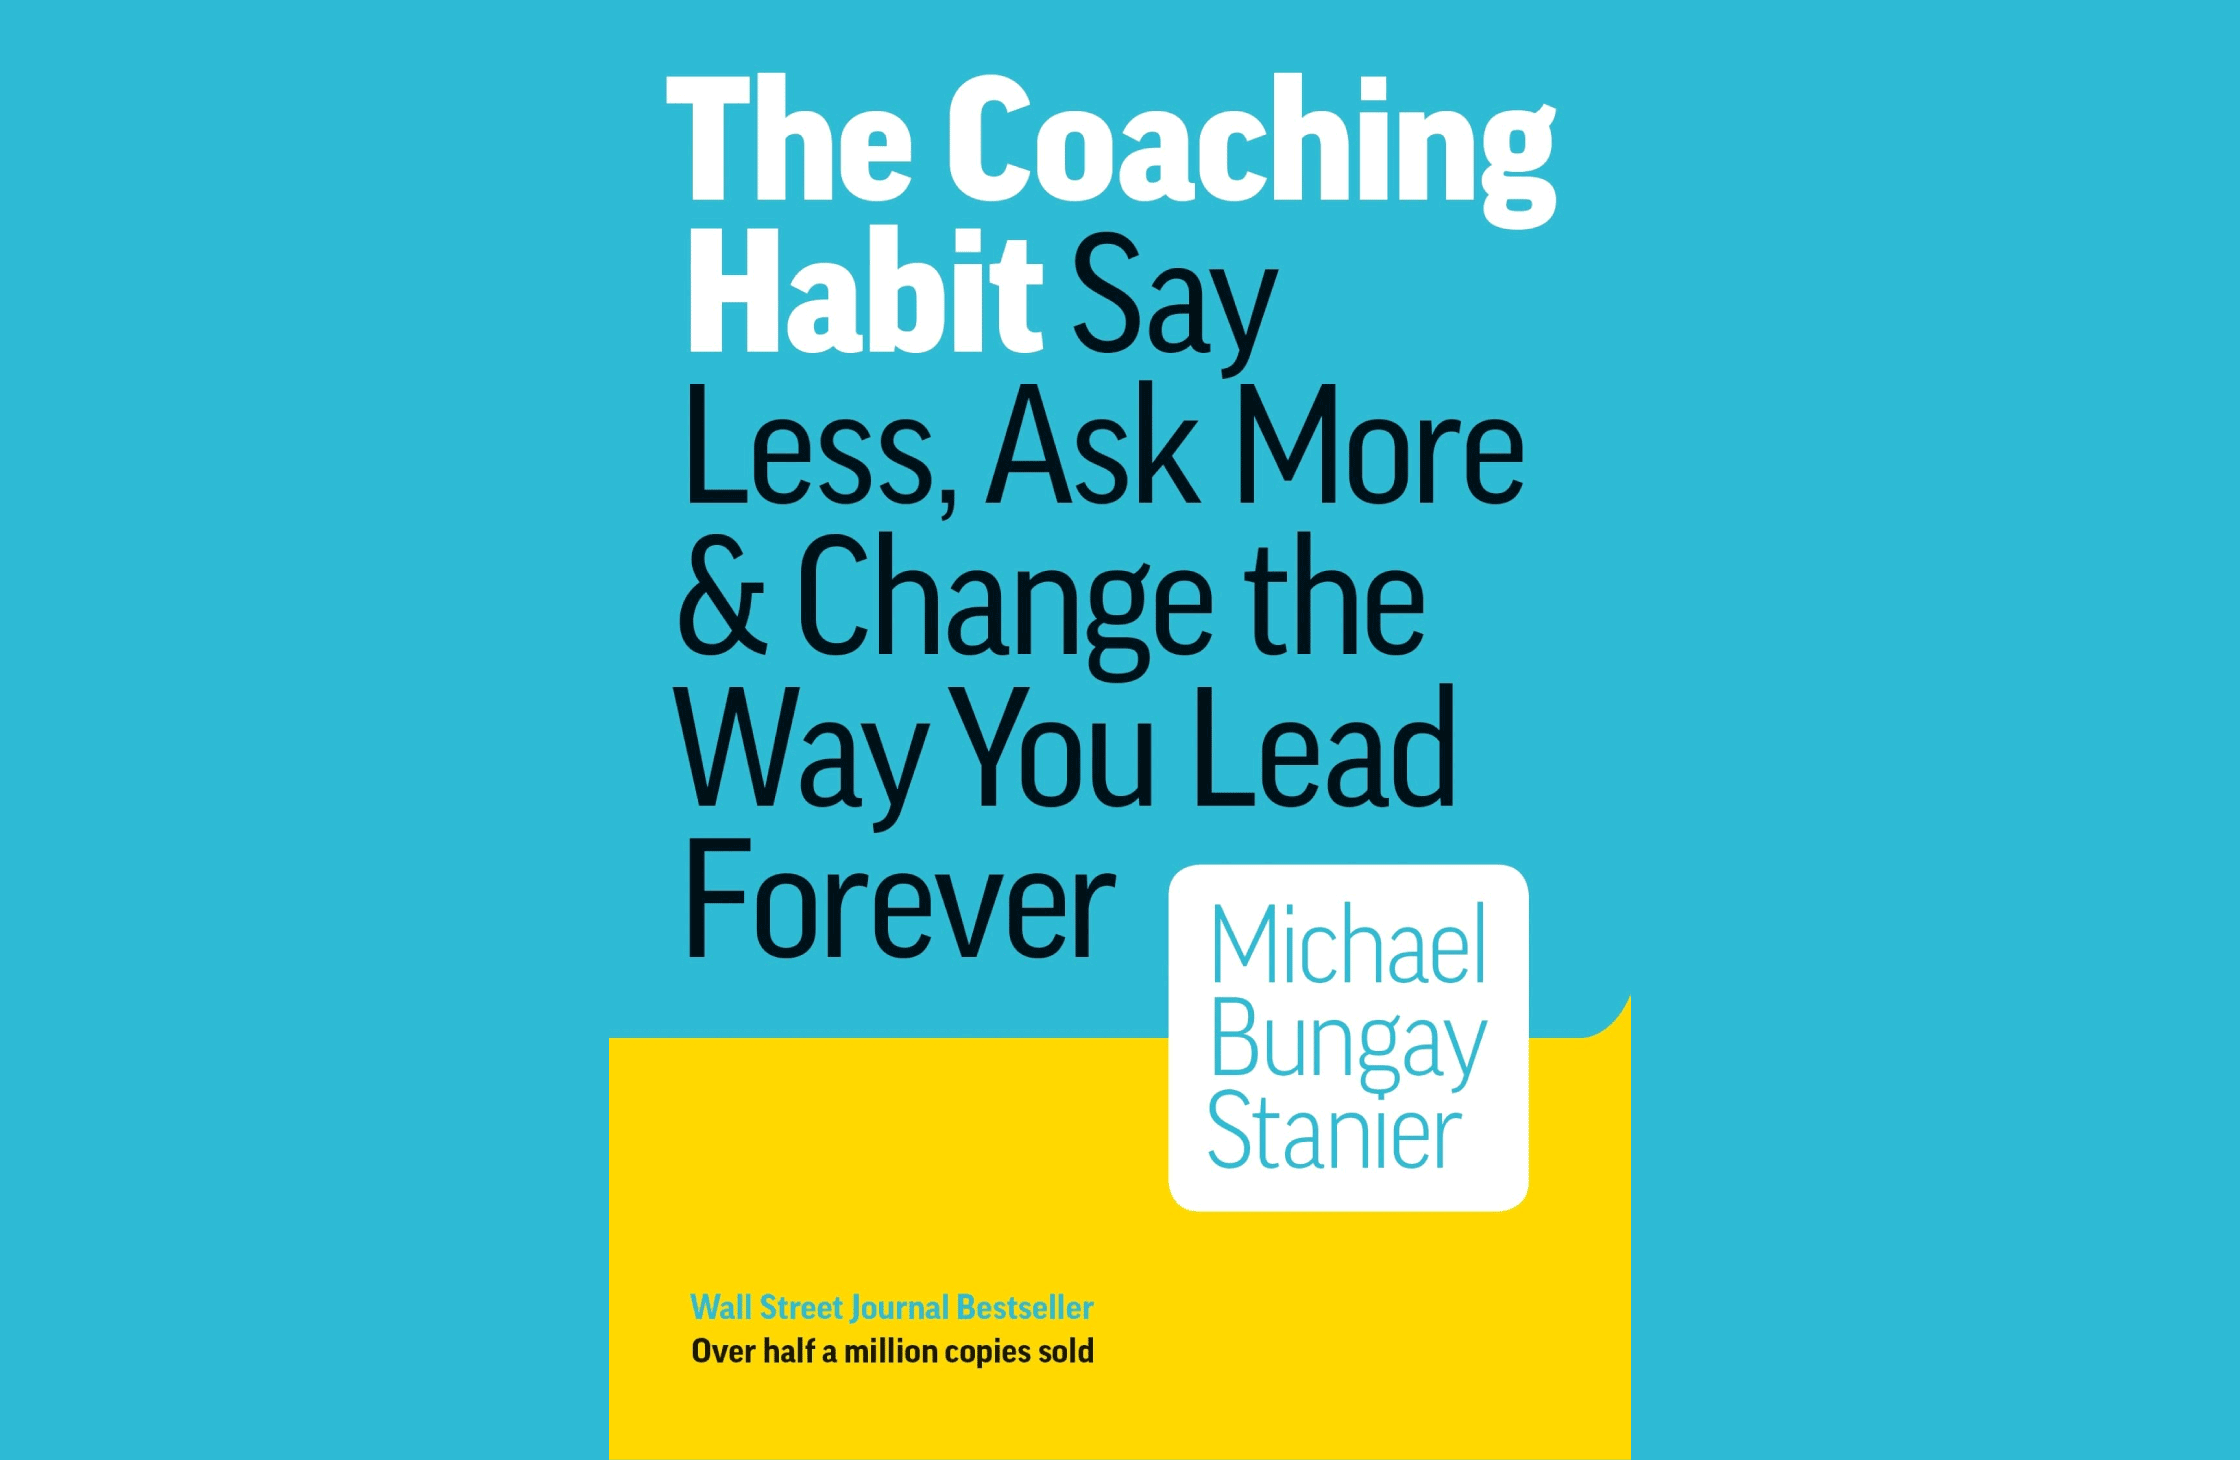 Summary: The Coaching Habit by Michael Bungay Stanier